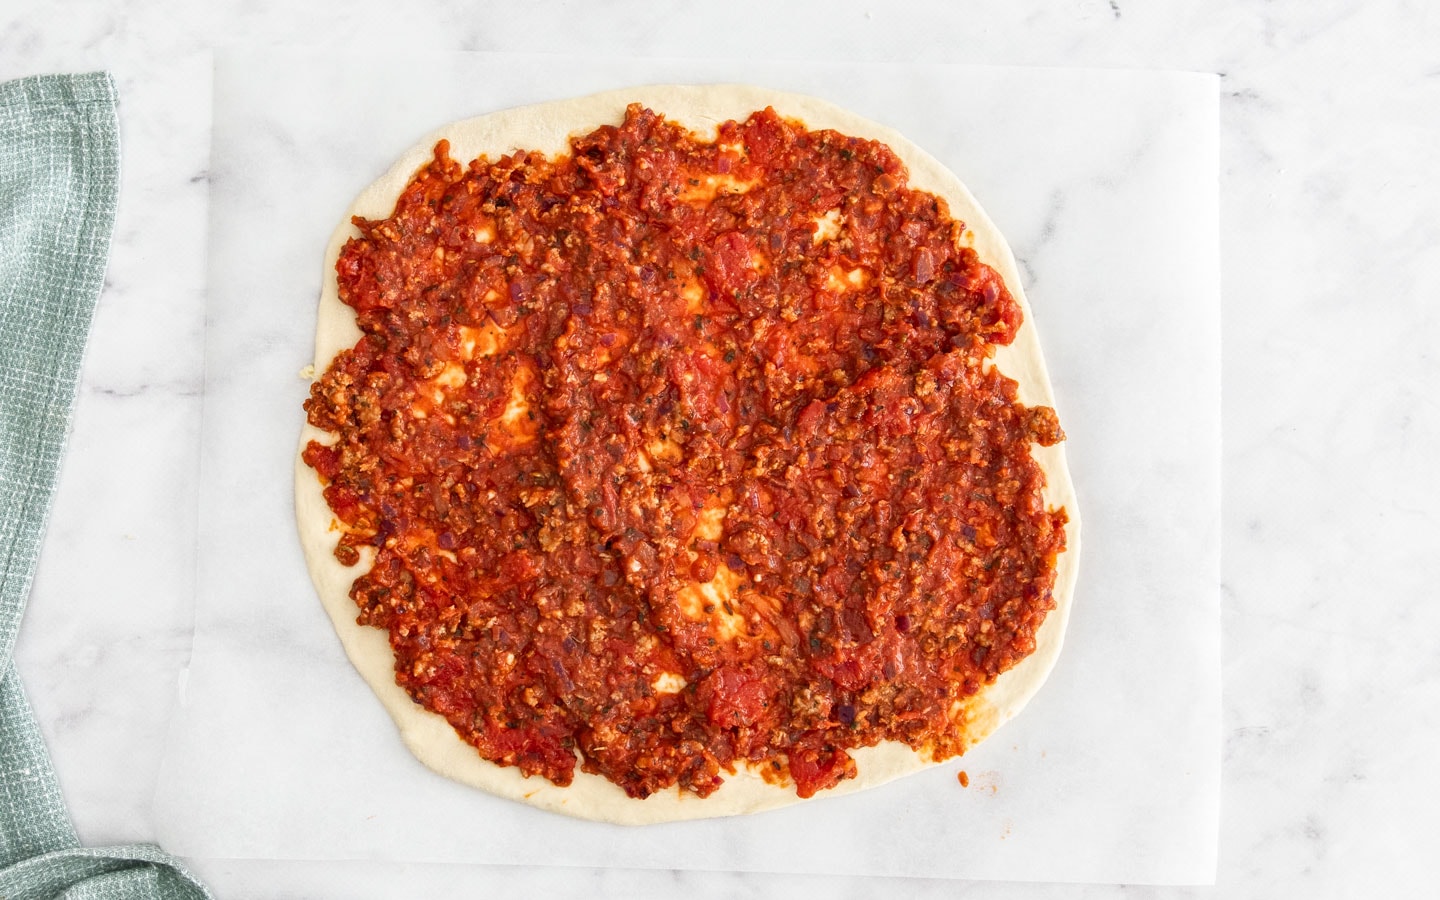 The tomato meat sauce spread on the pizza base.